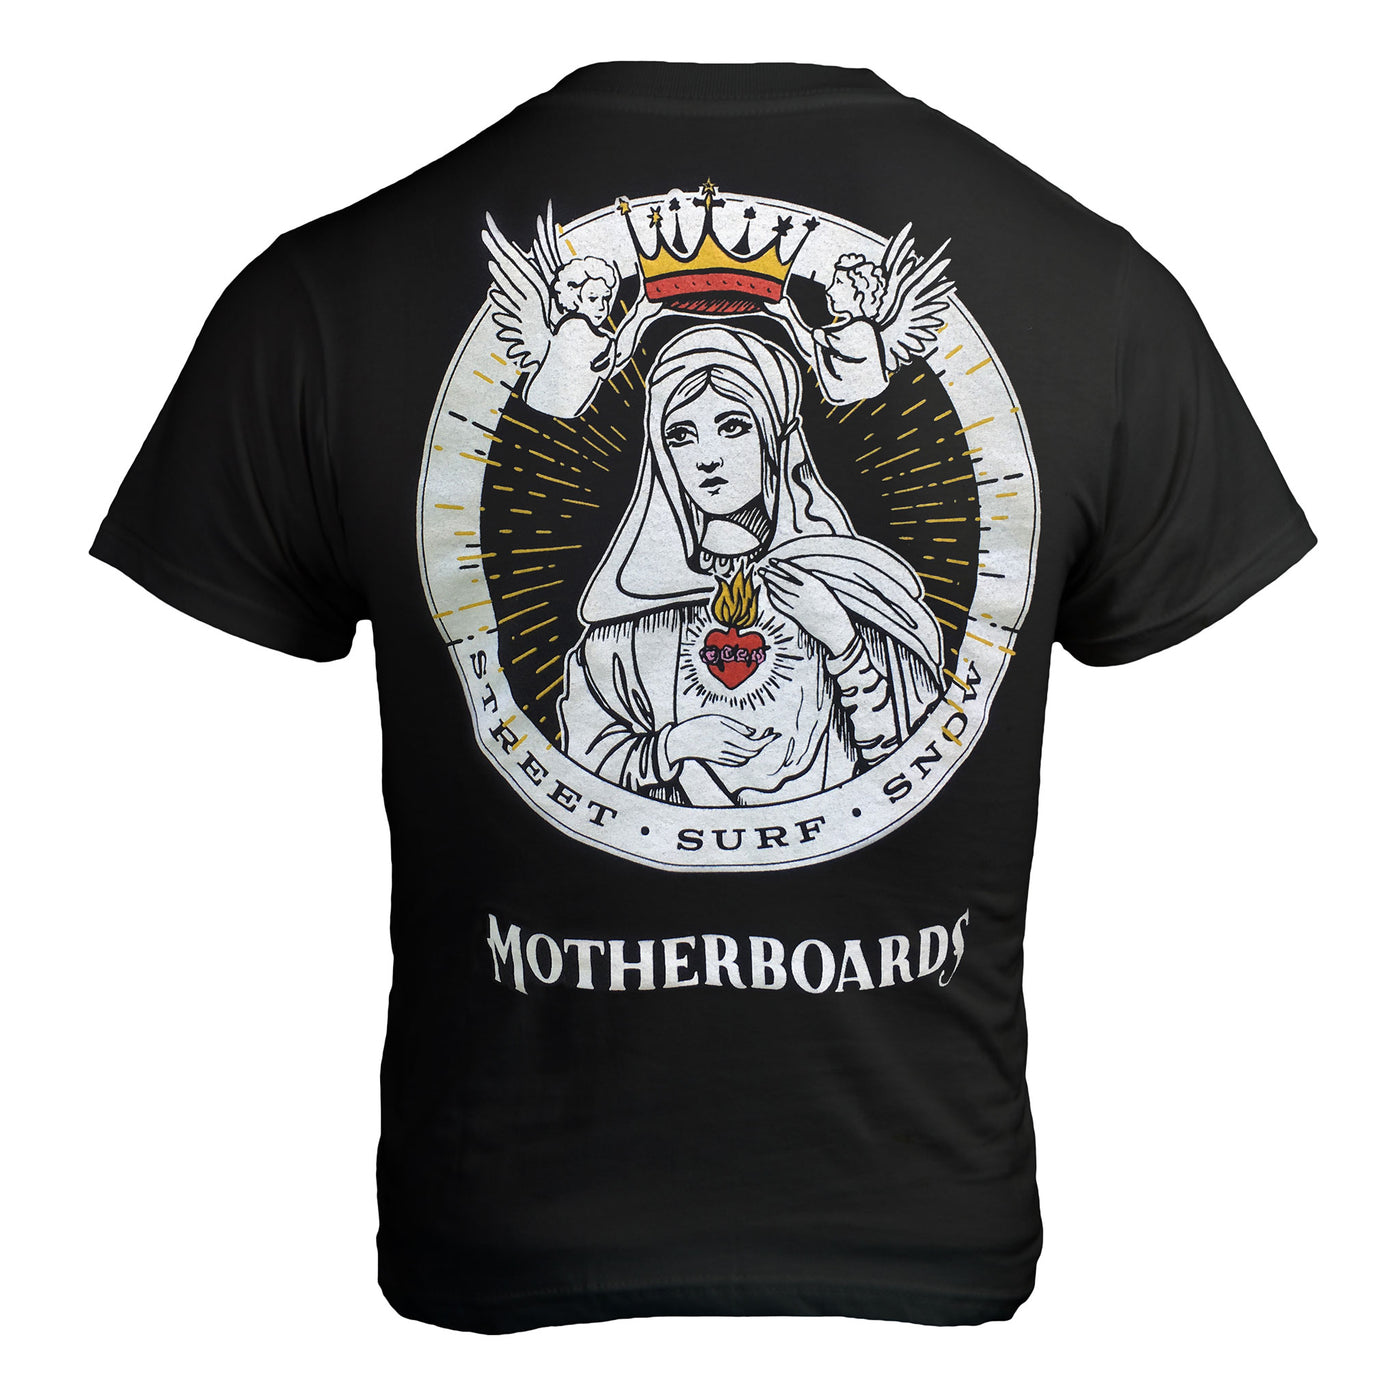 Motherboards Black T-Shirt with Madonna Coronation Back Logo